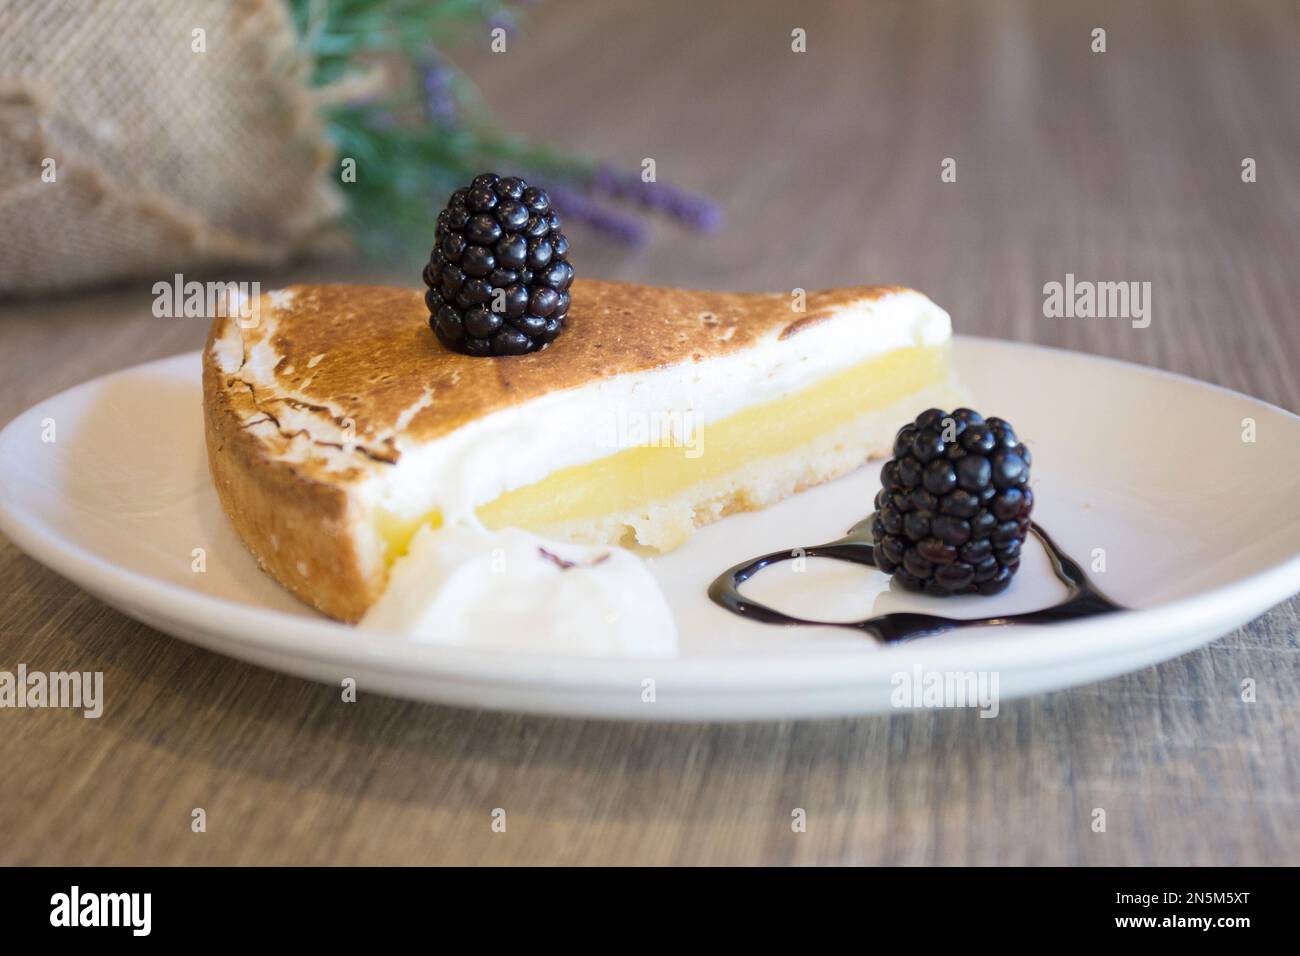 Lemon Pie or Lemon tart is a tart formed by a shortcrust pastry or puff pastry base that is filled with lemon cream. Stock Photo